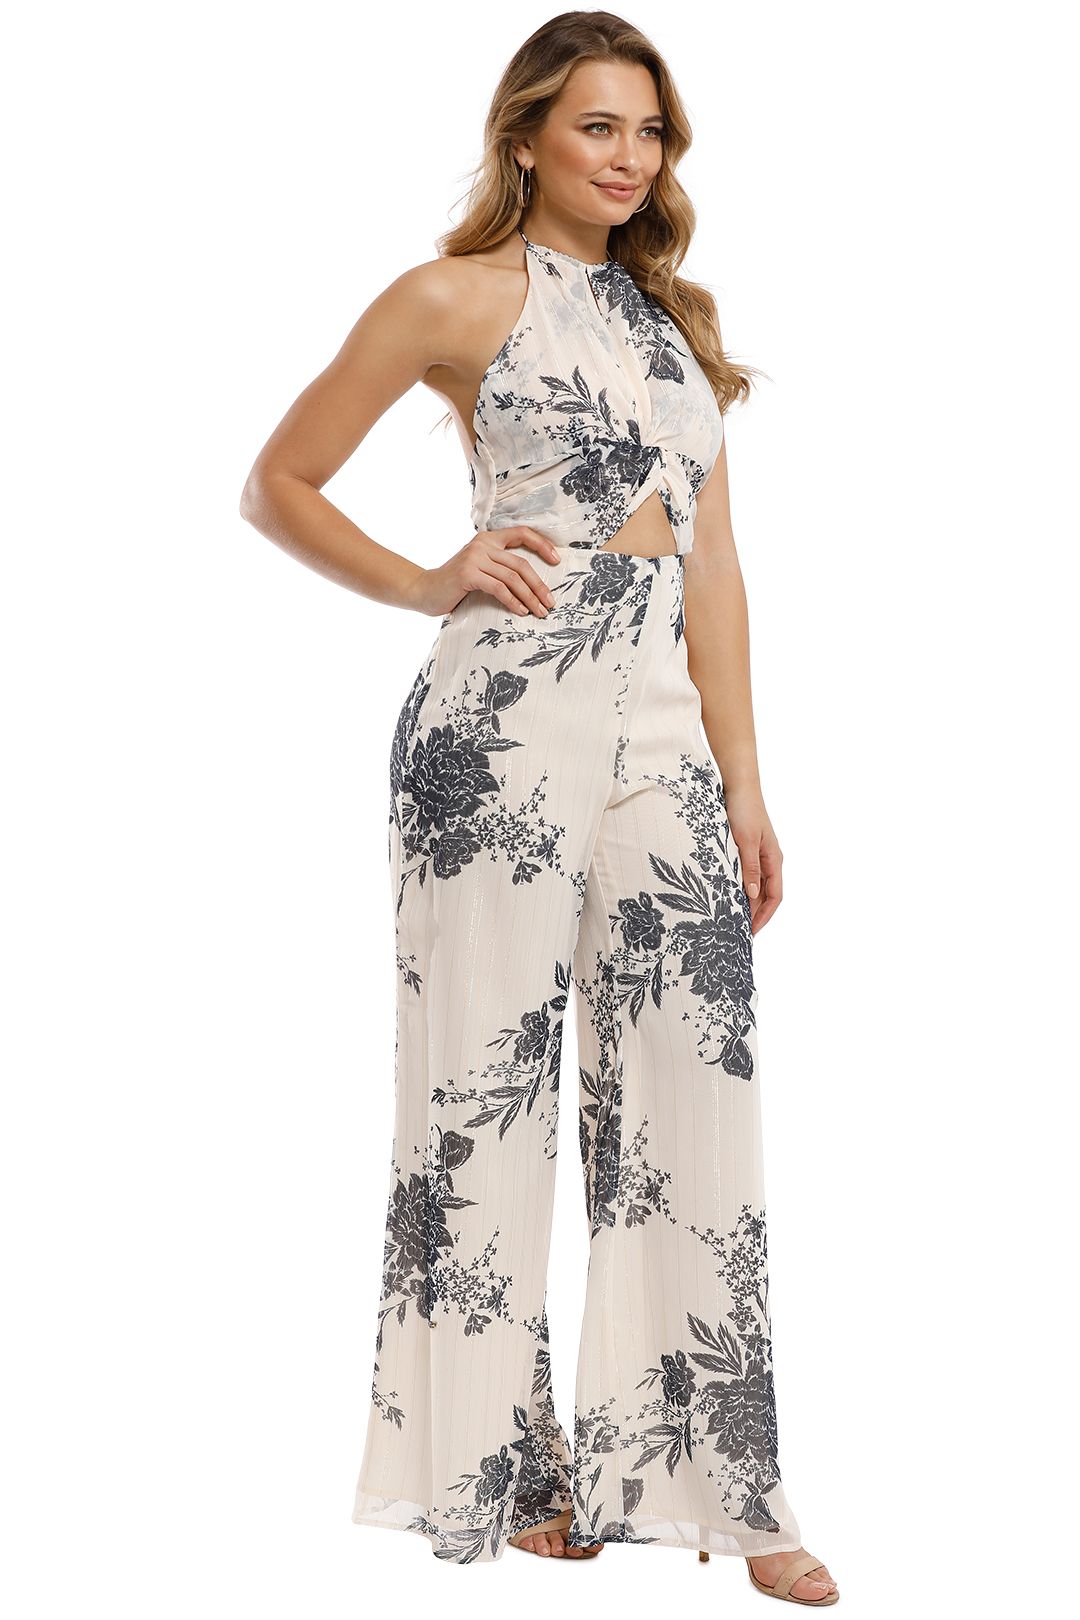 Wildflower Jumpsuit by The Jetset Diaries for Rent | GlamCorner